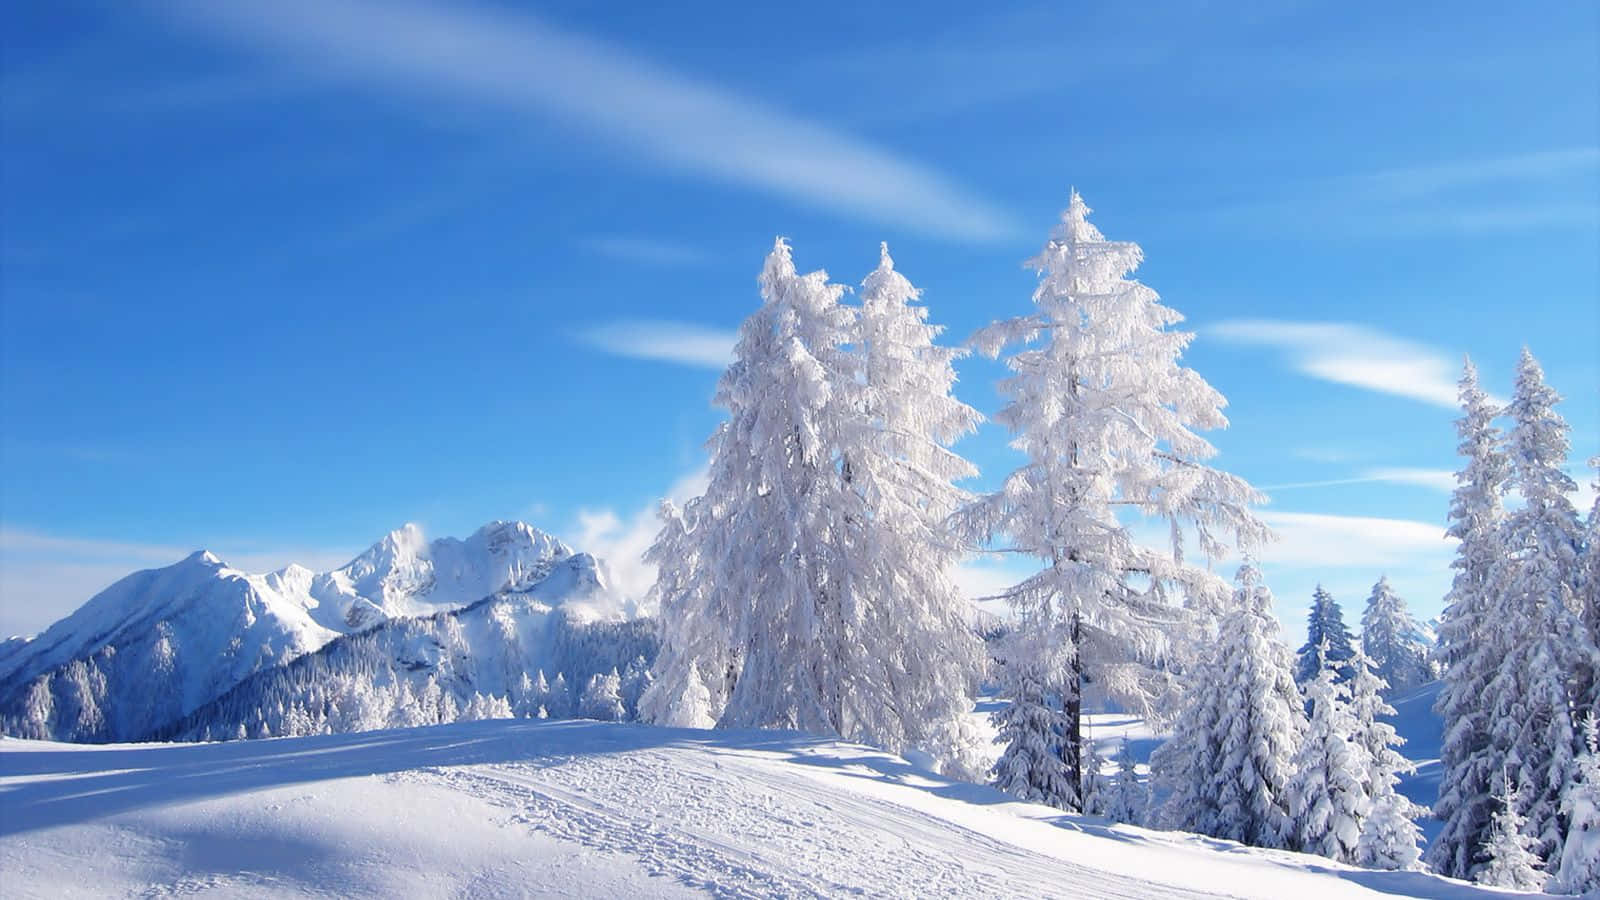 Enjoy the scenery of a picturesque winter landscape.